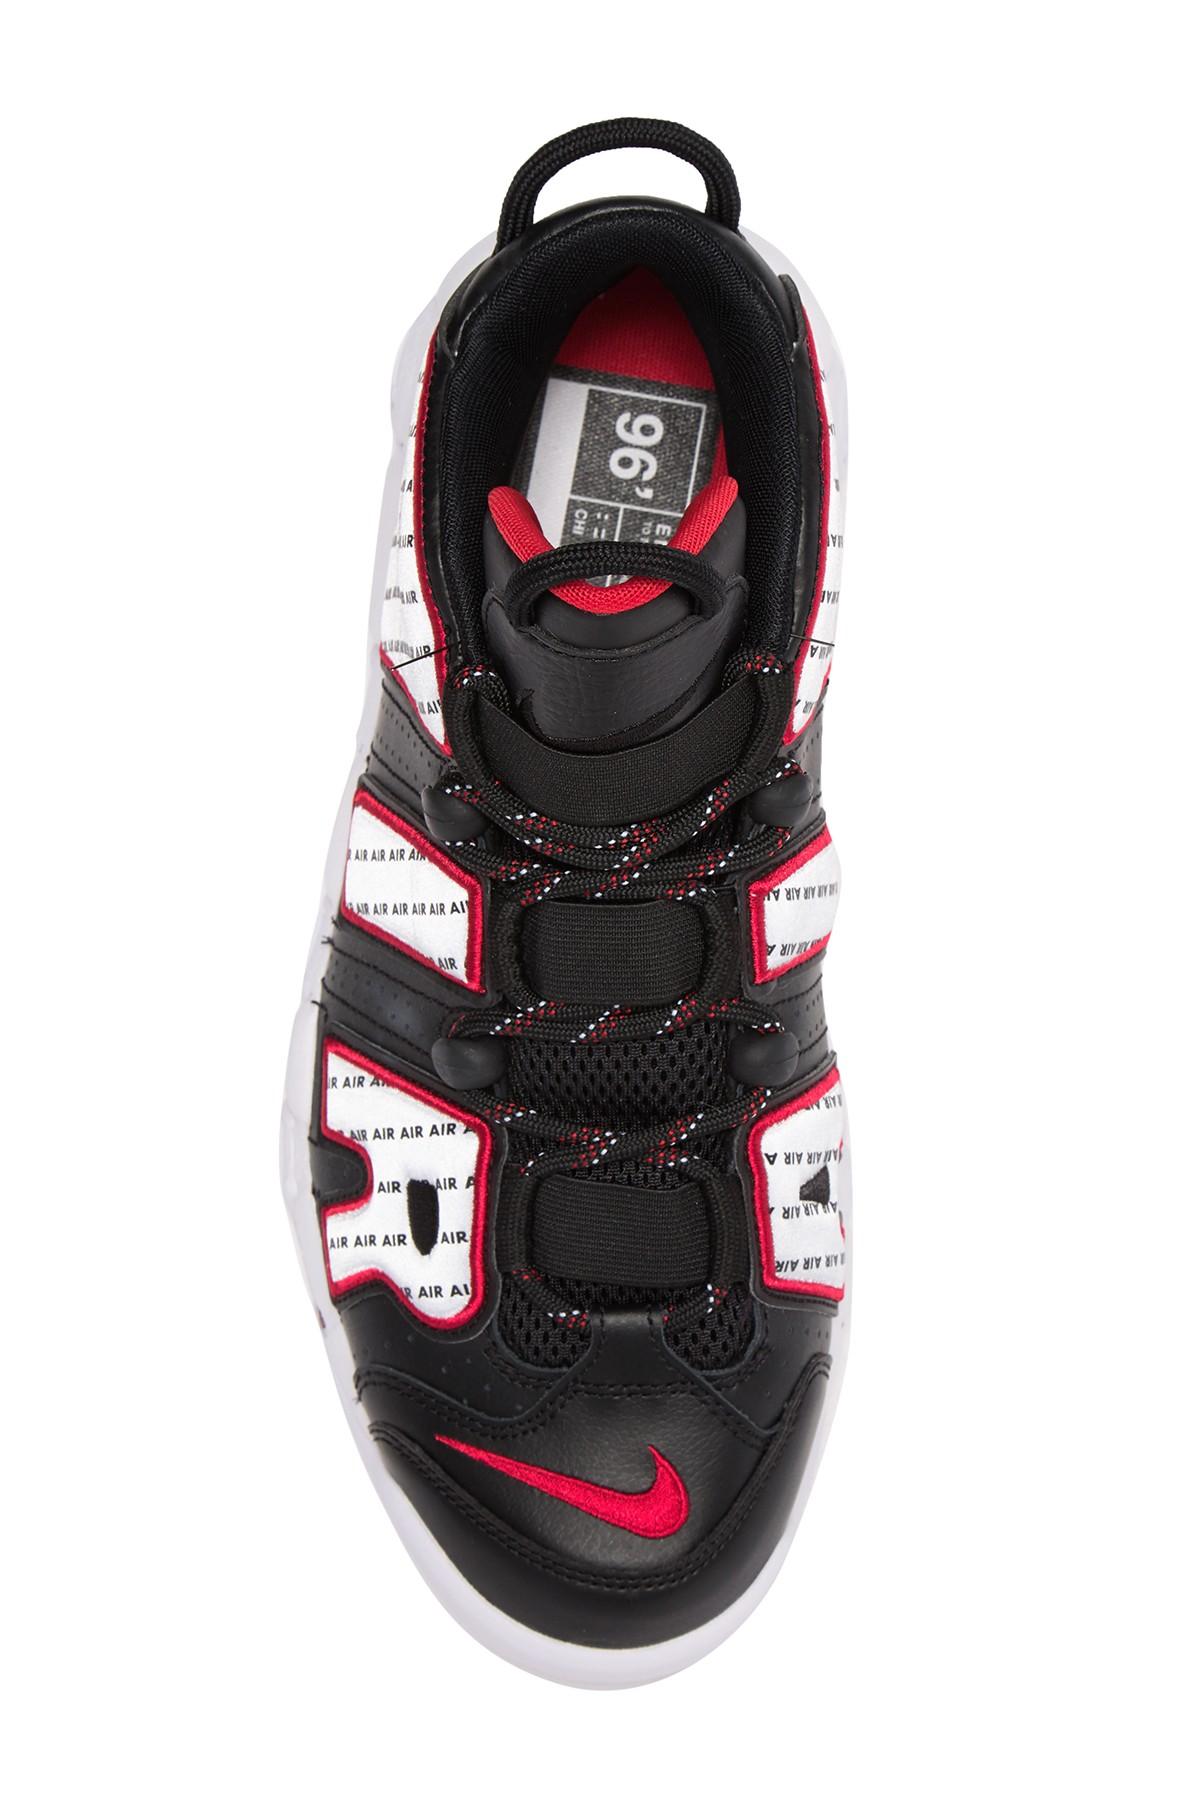 Nike Air More Uptempo '96 - Size 15 in Black/White-University Red 